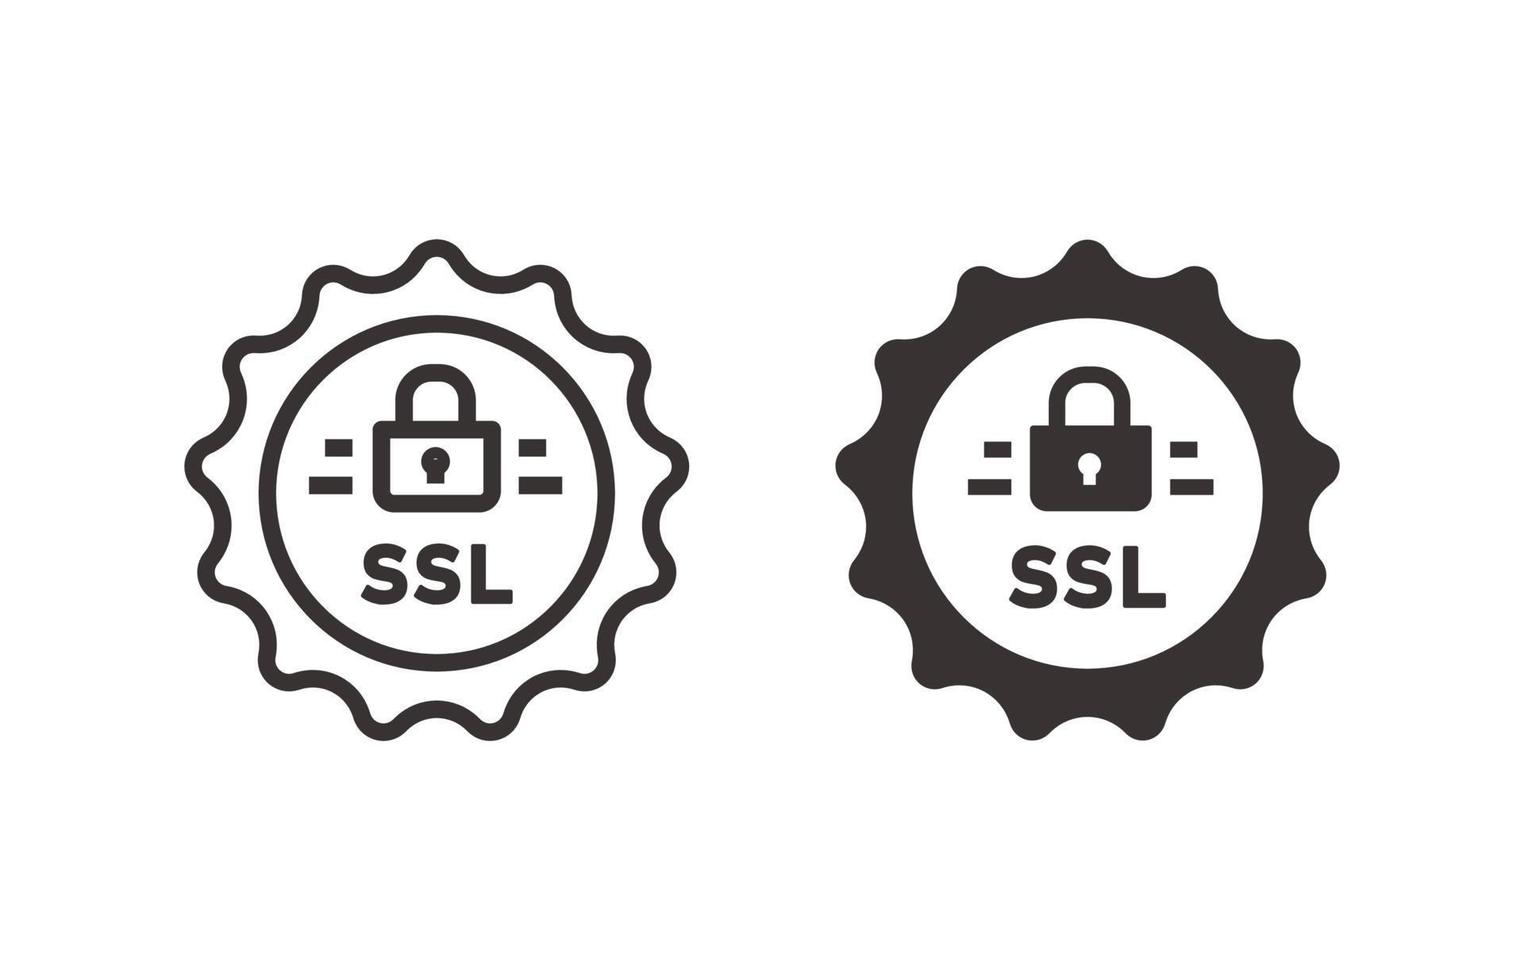 SSL security icon on white background. Vector illustration.